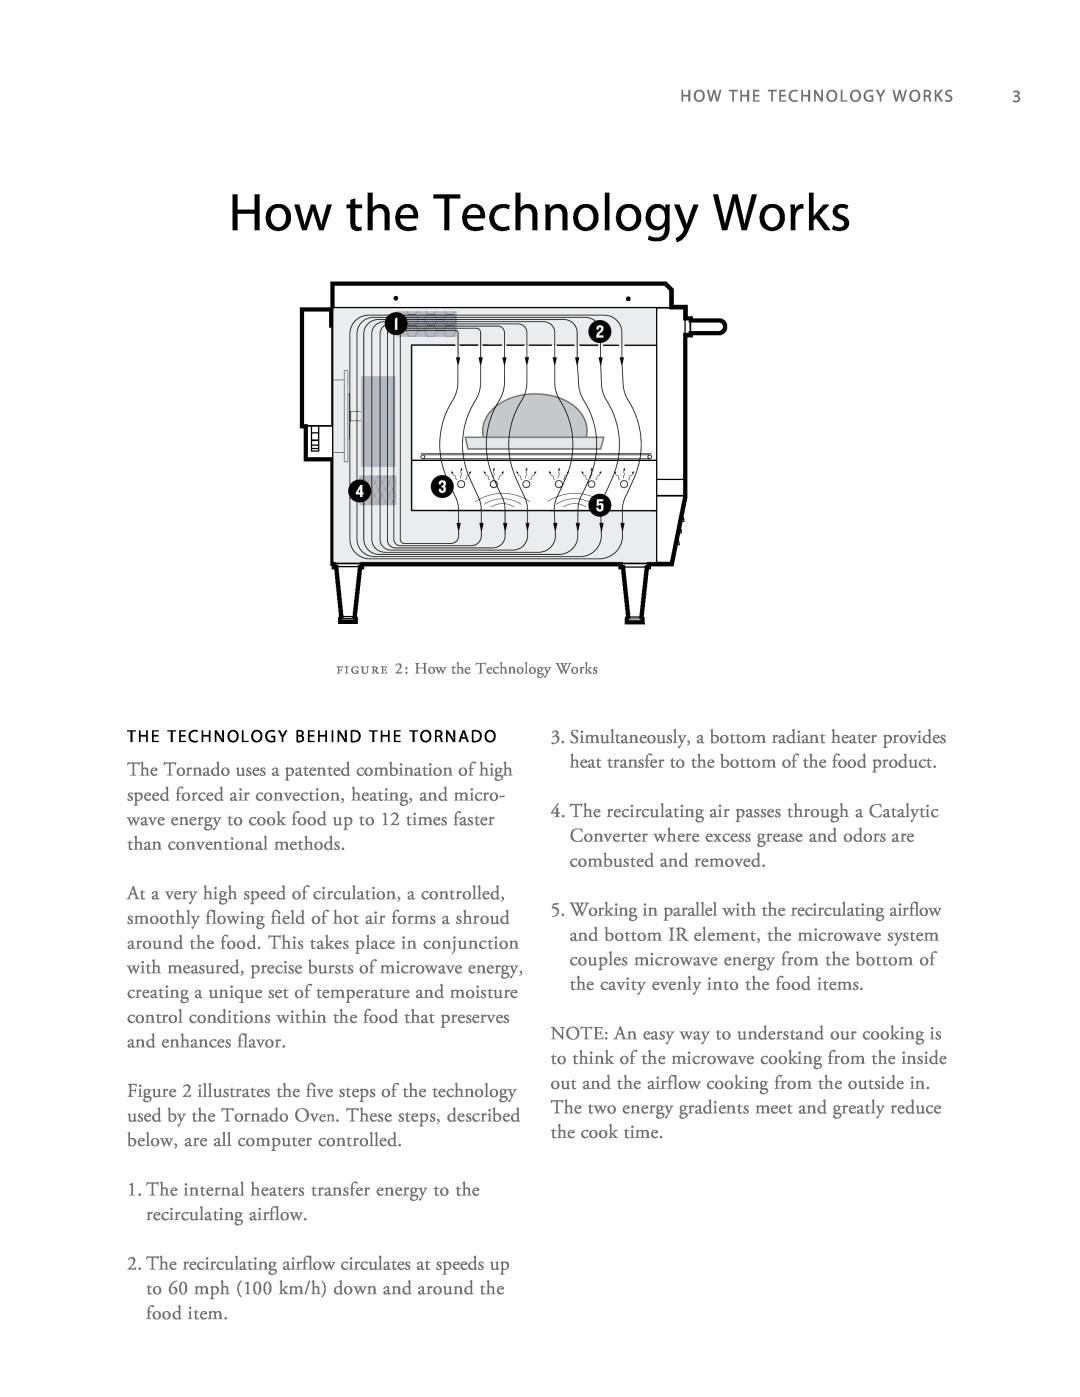 Turbo Chef Technologies Tornado 2 owner manual How the Technology Works 